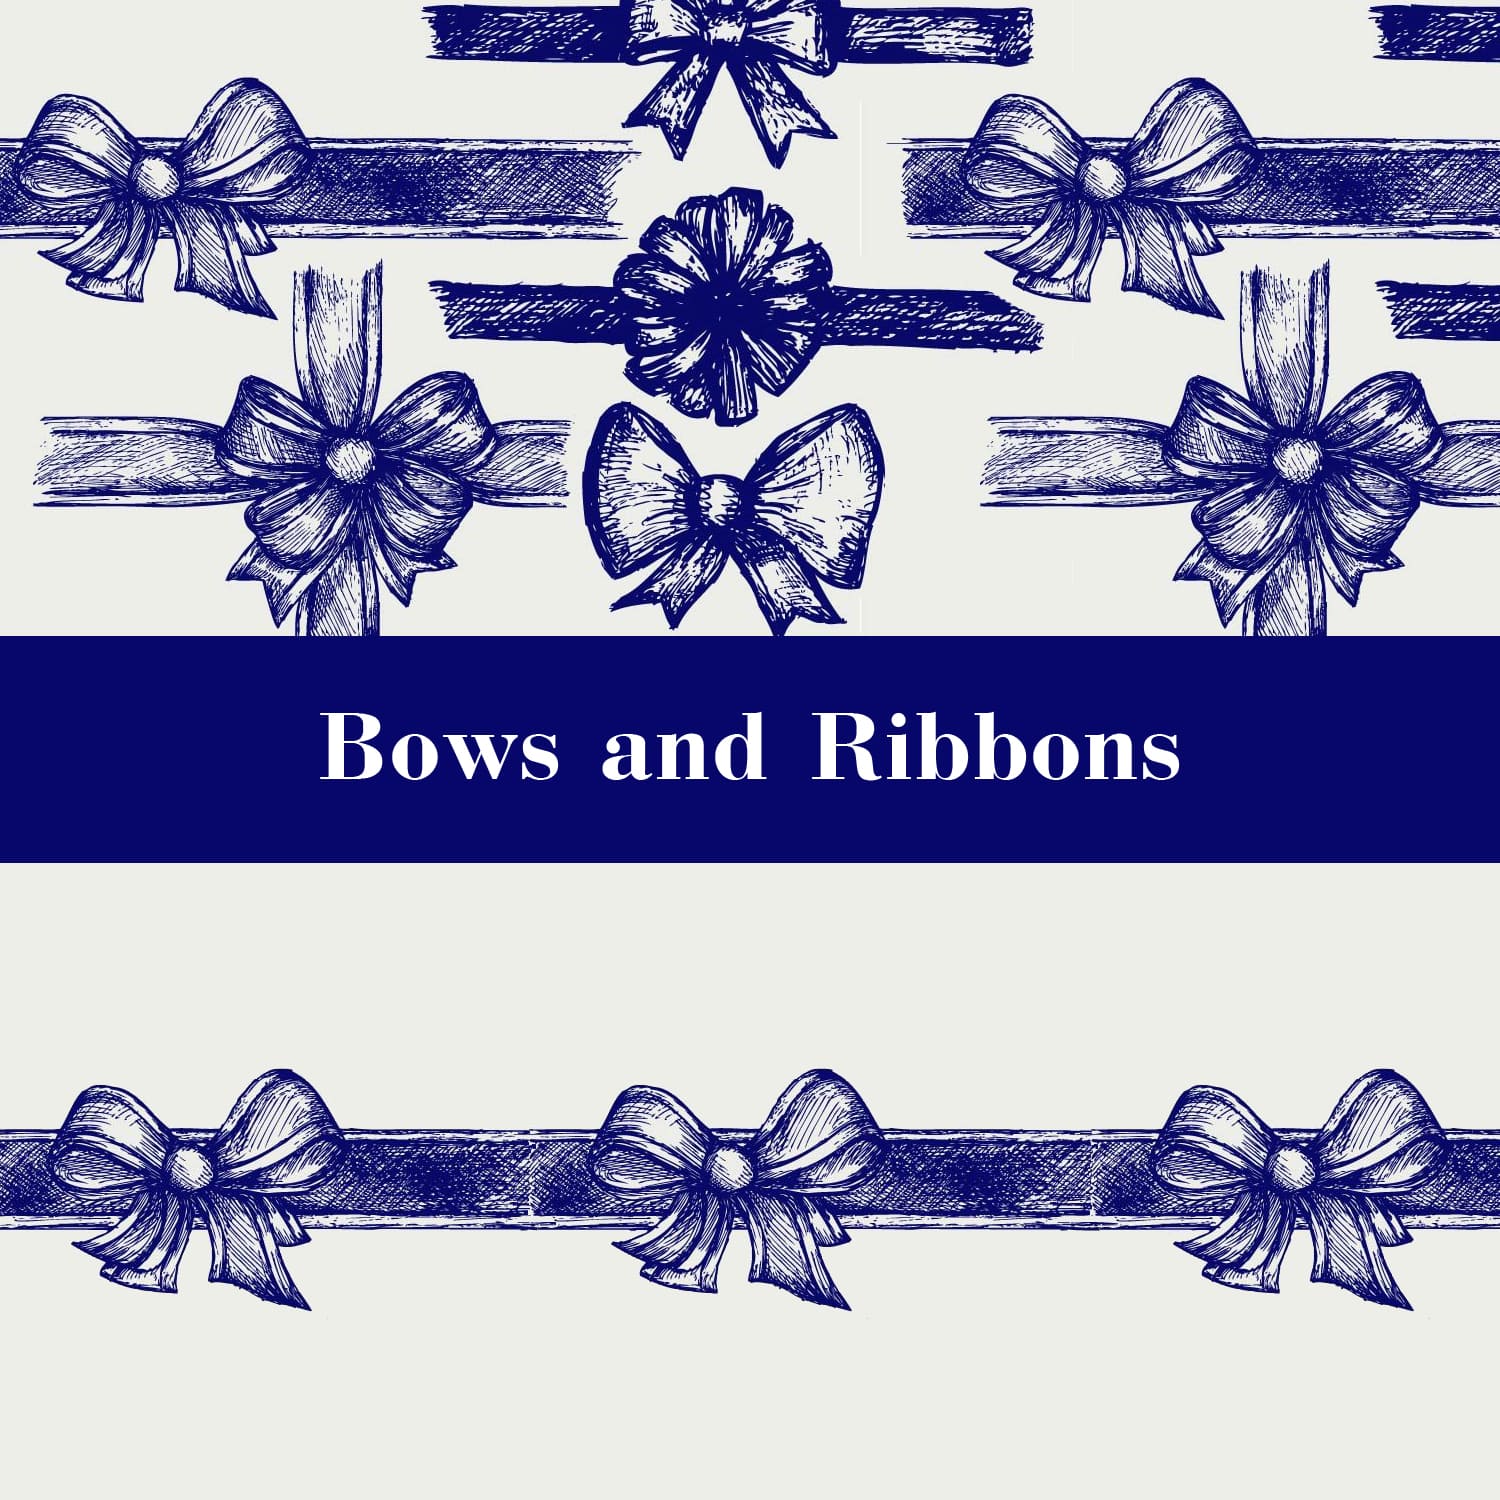 Bows and Ribbons cover.